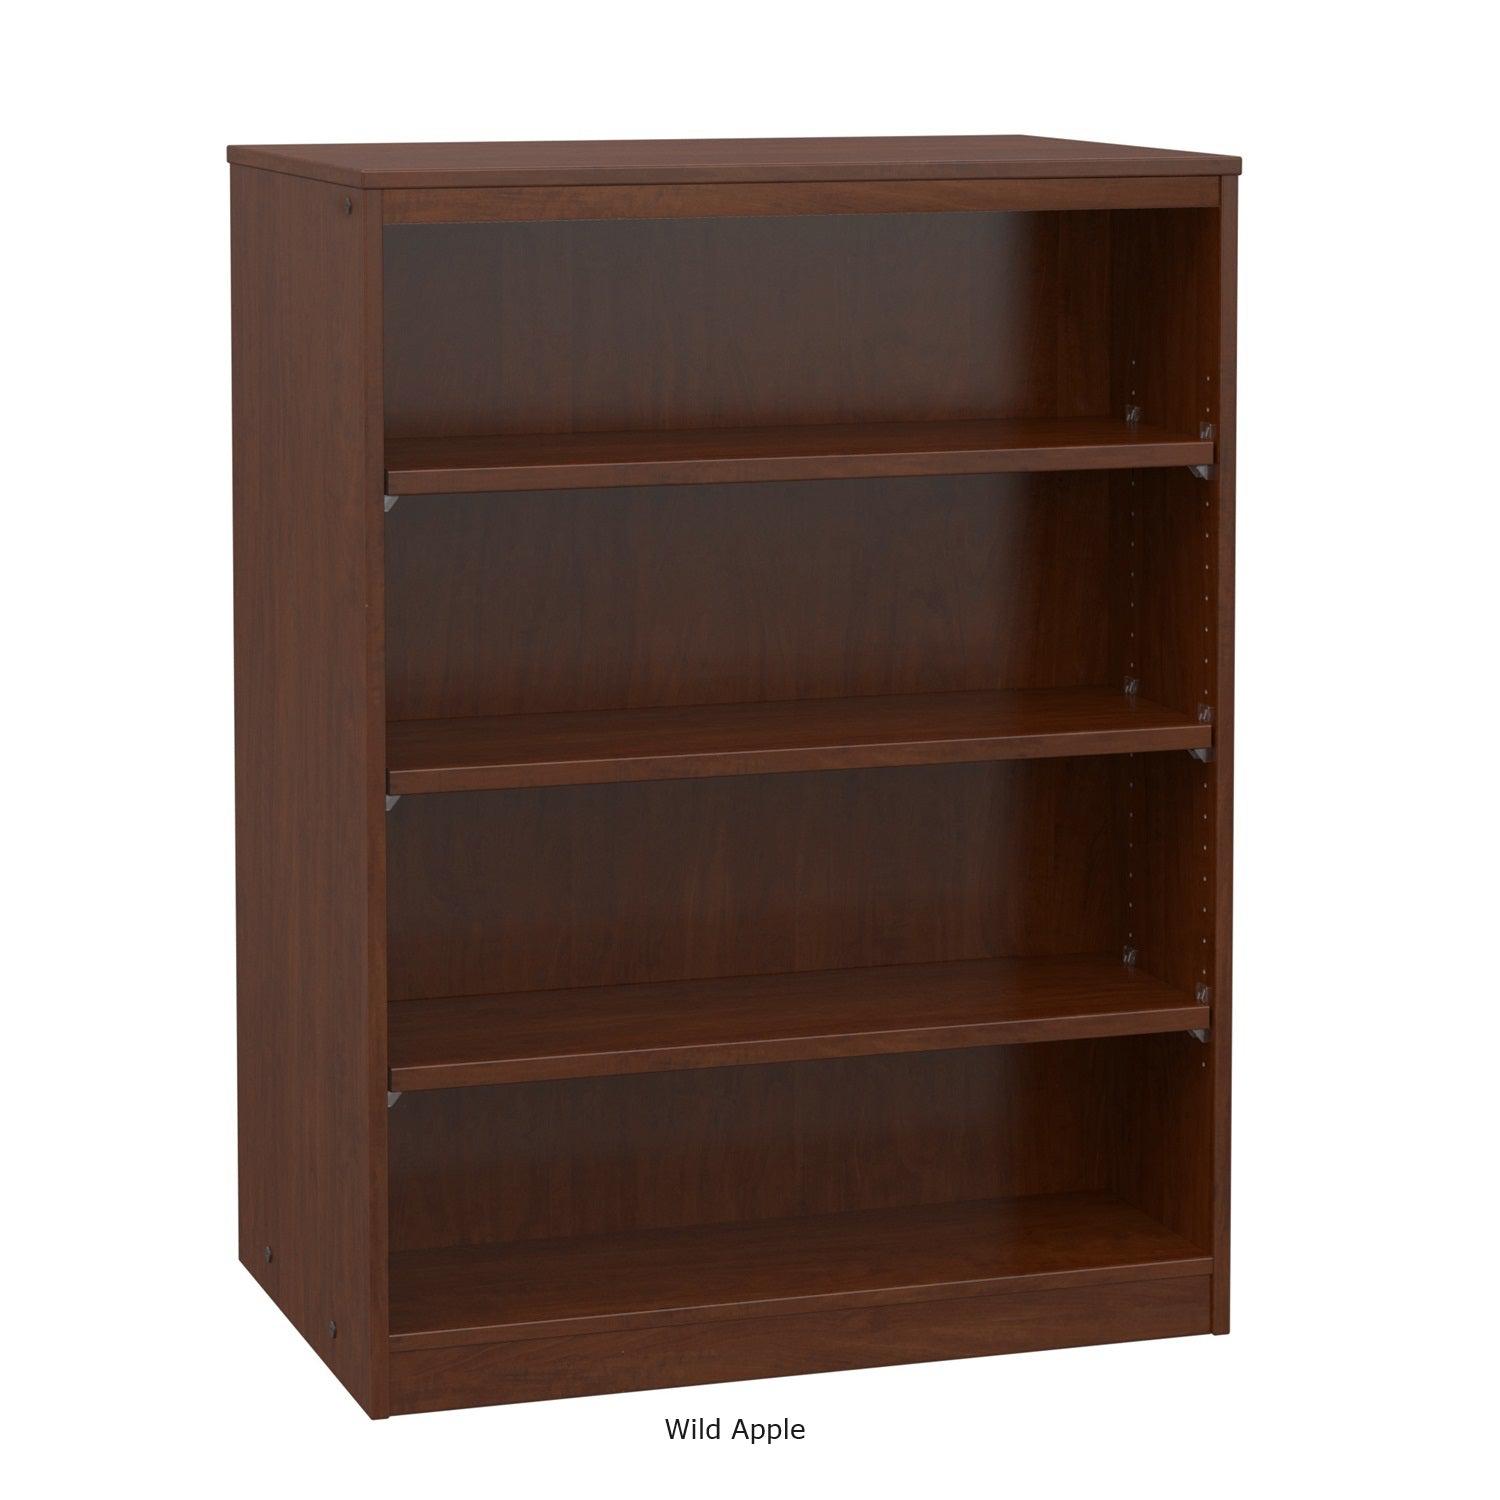 Double Sided 10-Shelf Bookcase with 6 Adjustable Shelves, 48" High